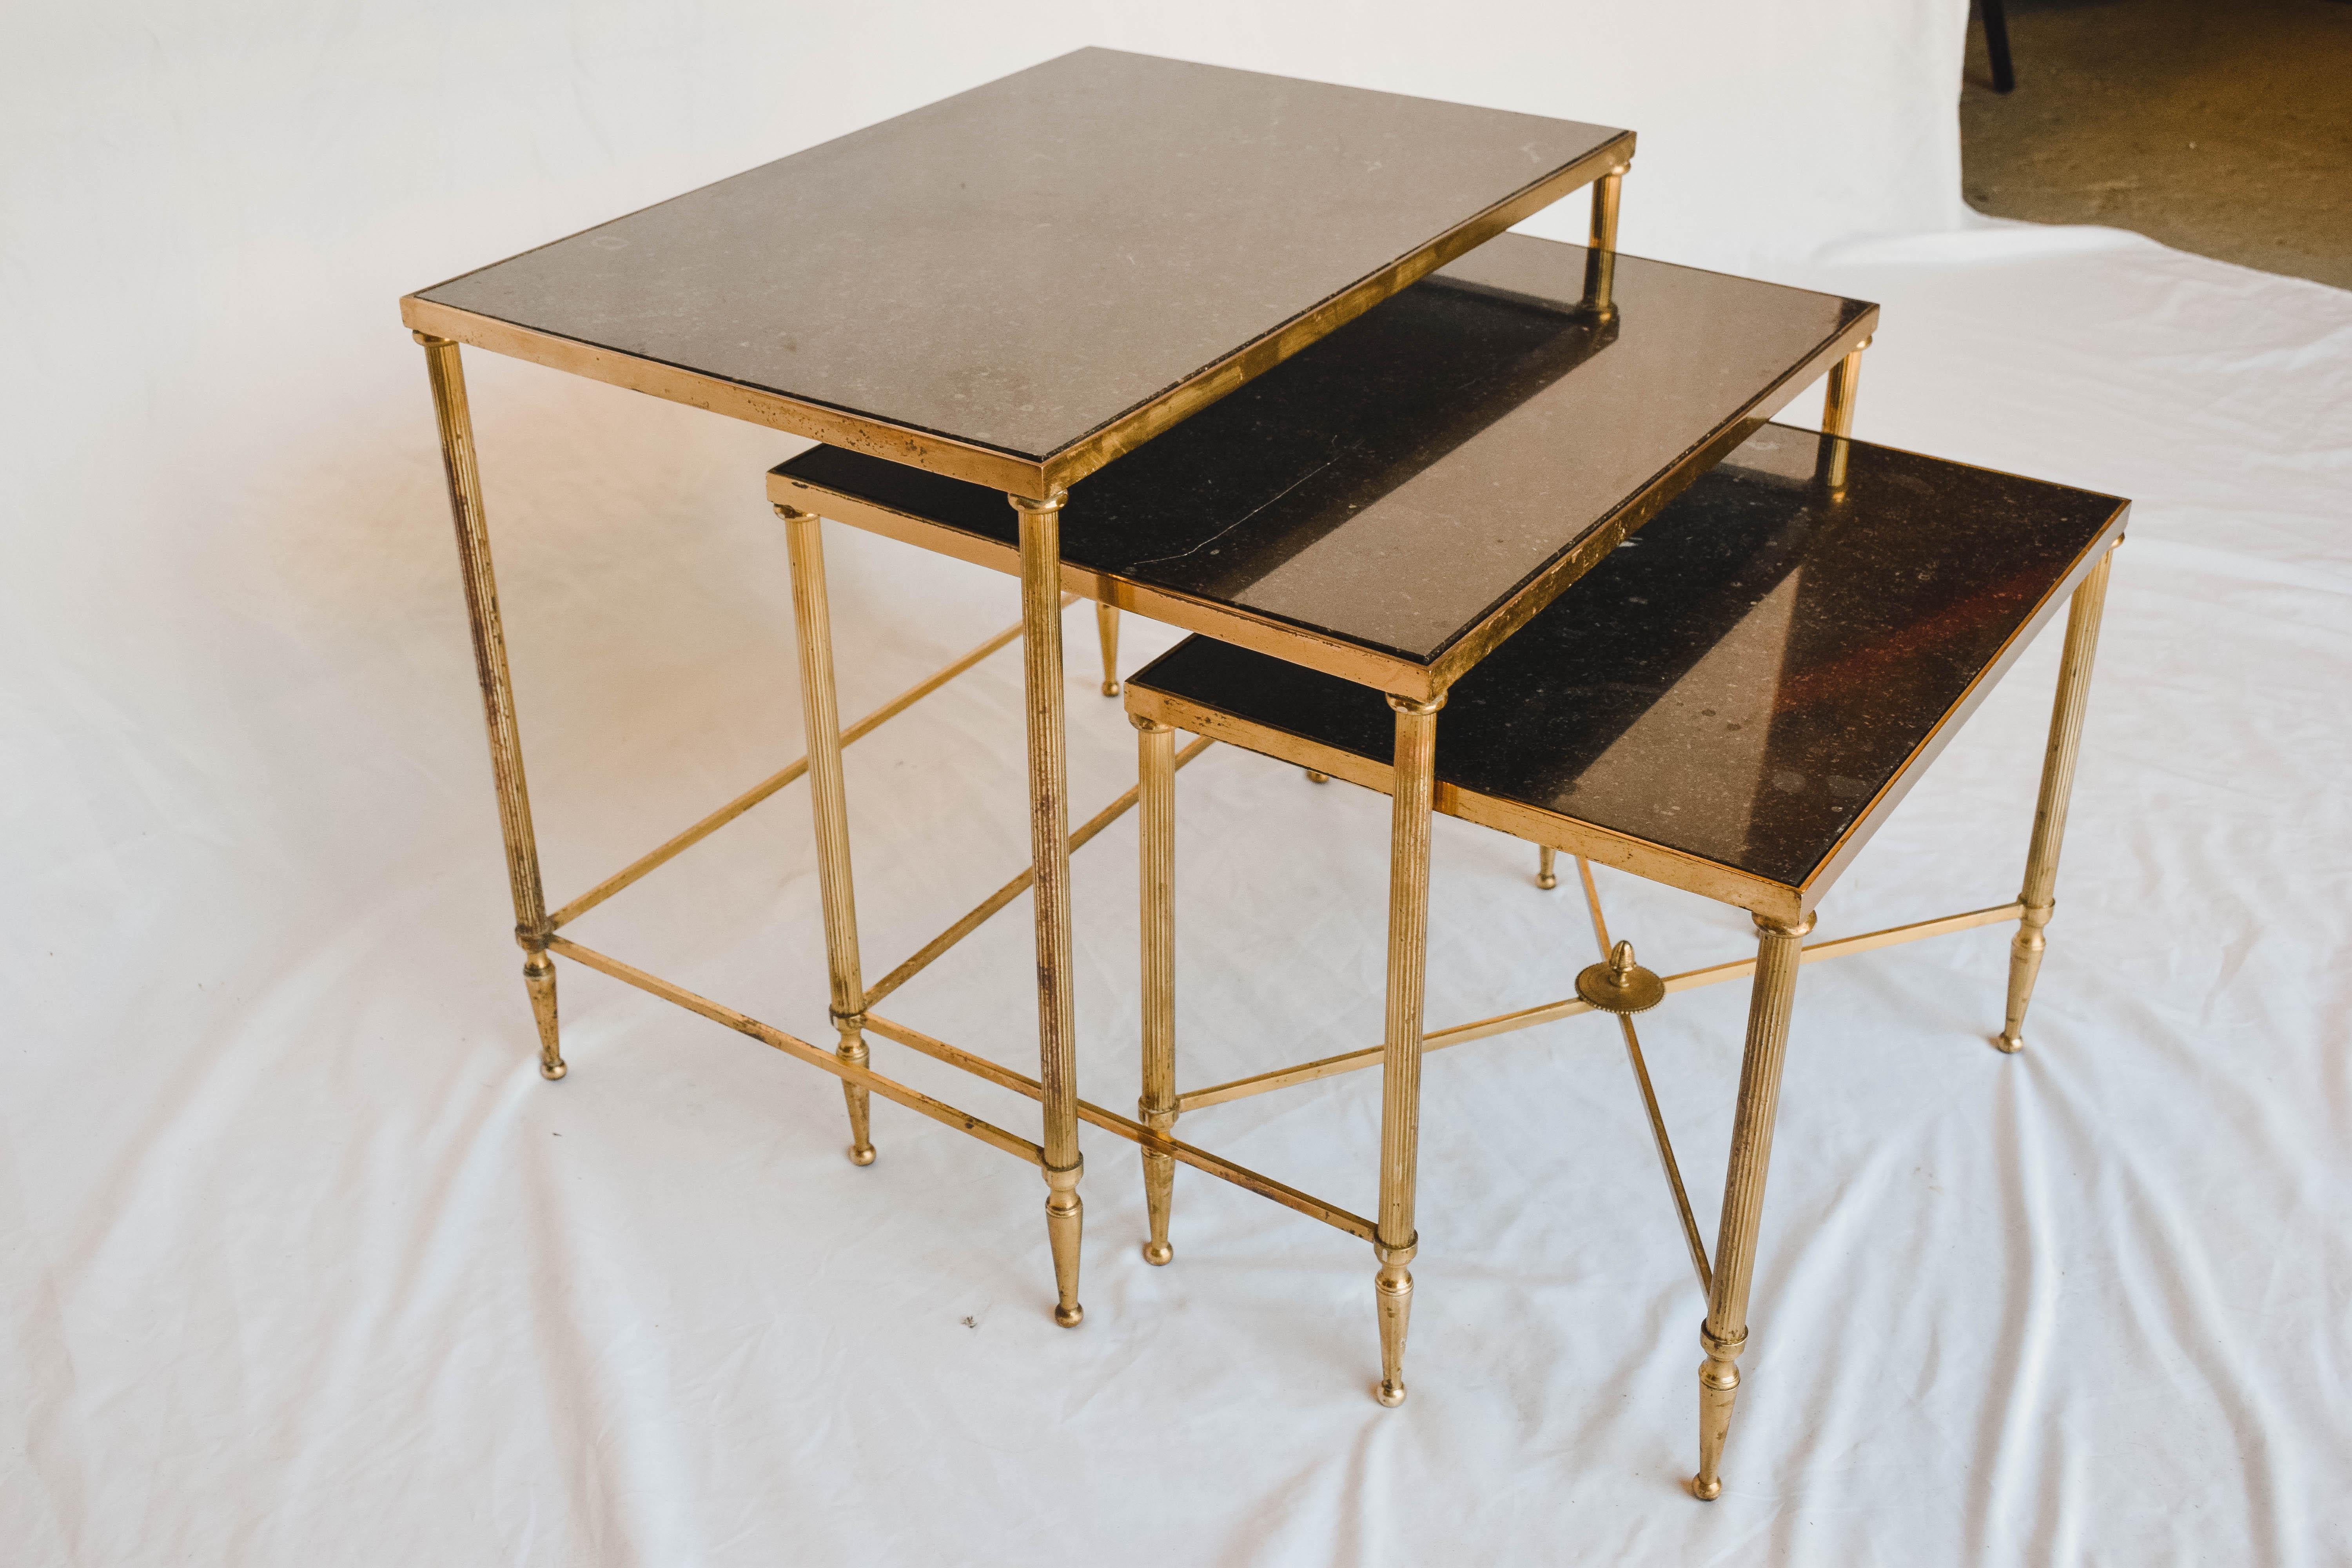 We found these wonderful French Mid-Century Modern nesting tables in Lyon France. This versatile set of three tables have beautiful black marble tops and brass frames.

Tables measure:
14 1/2